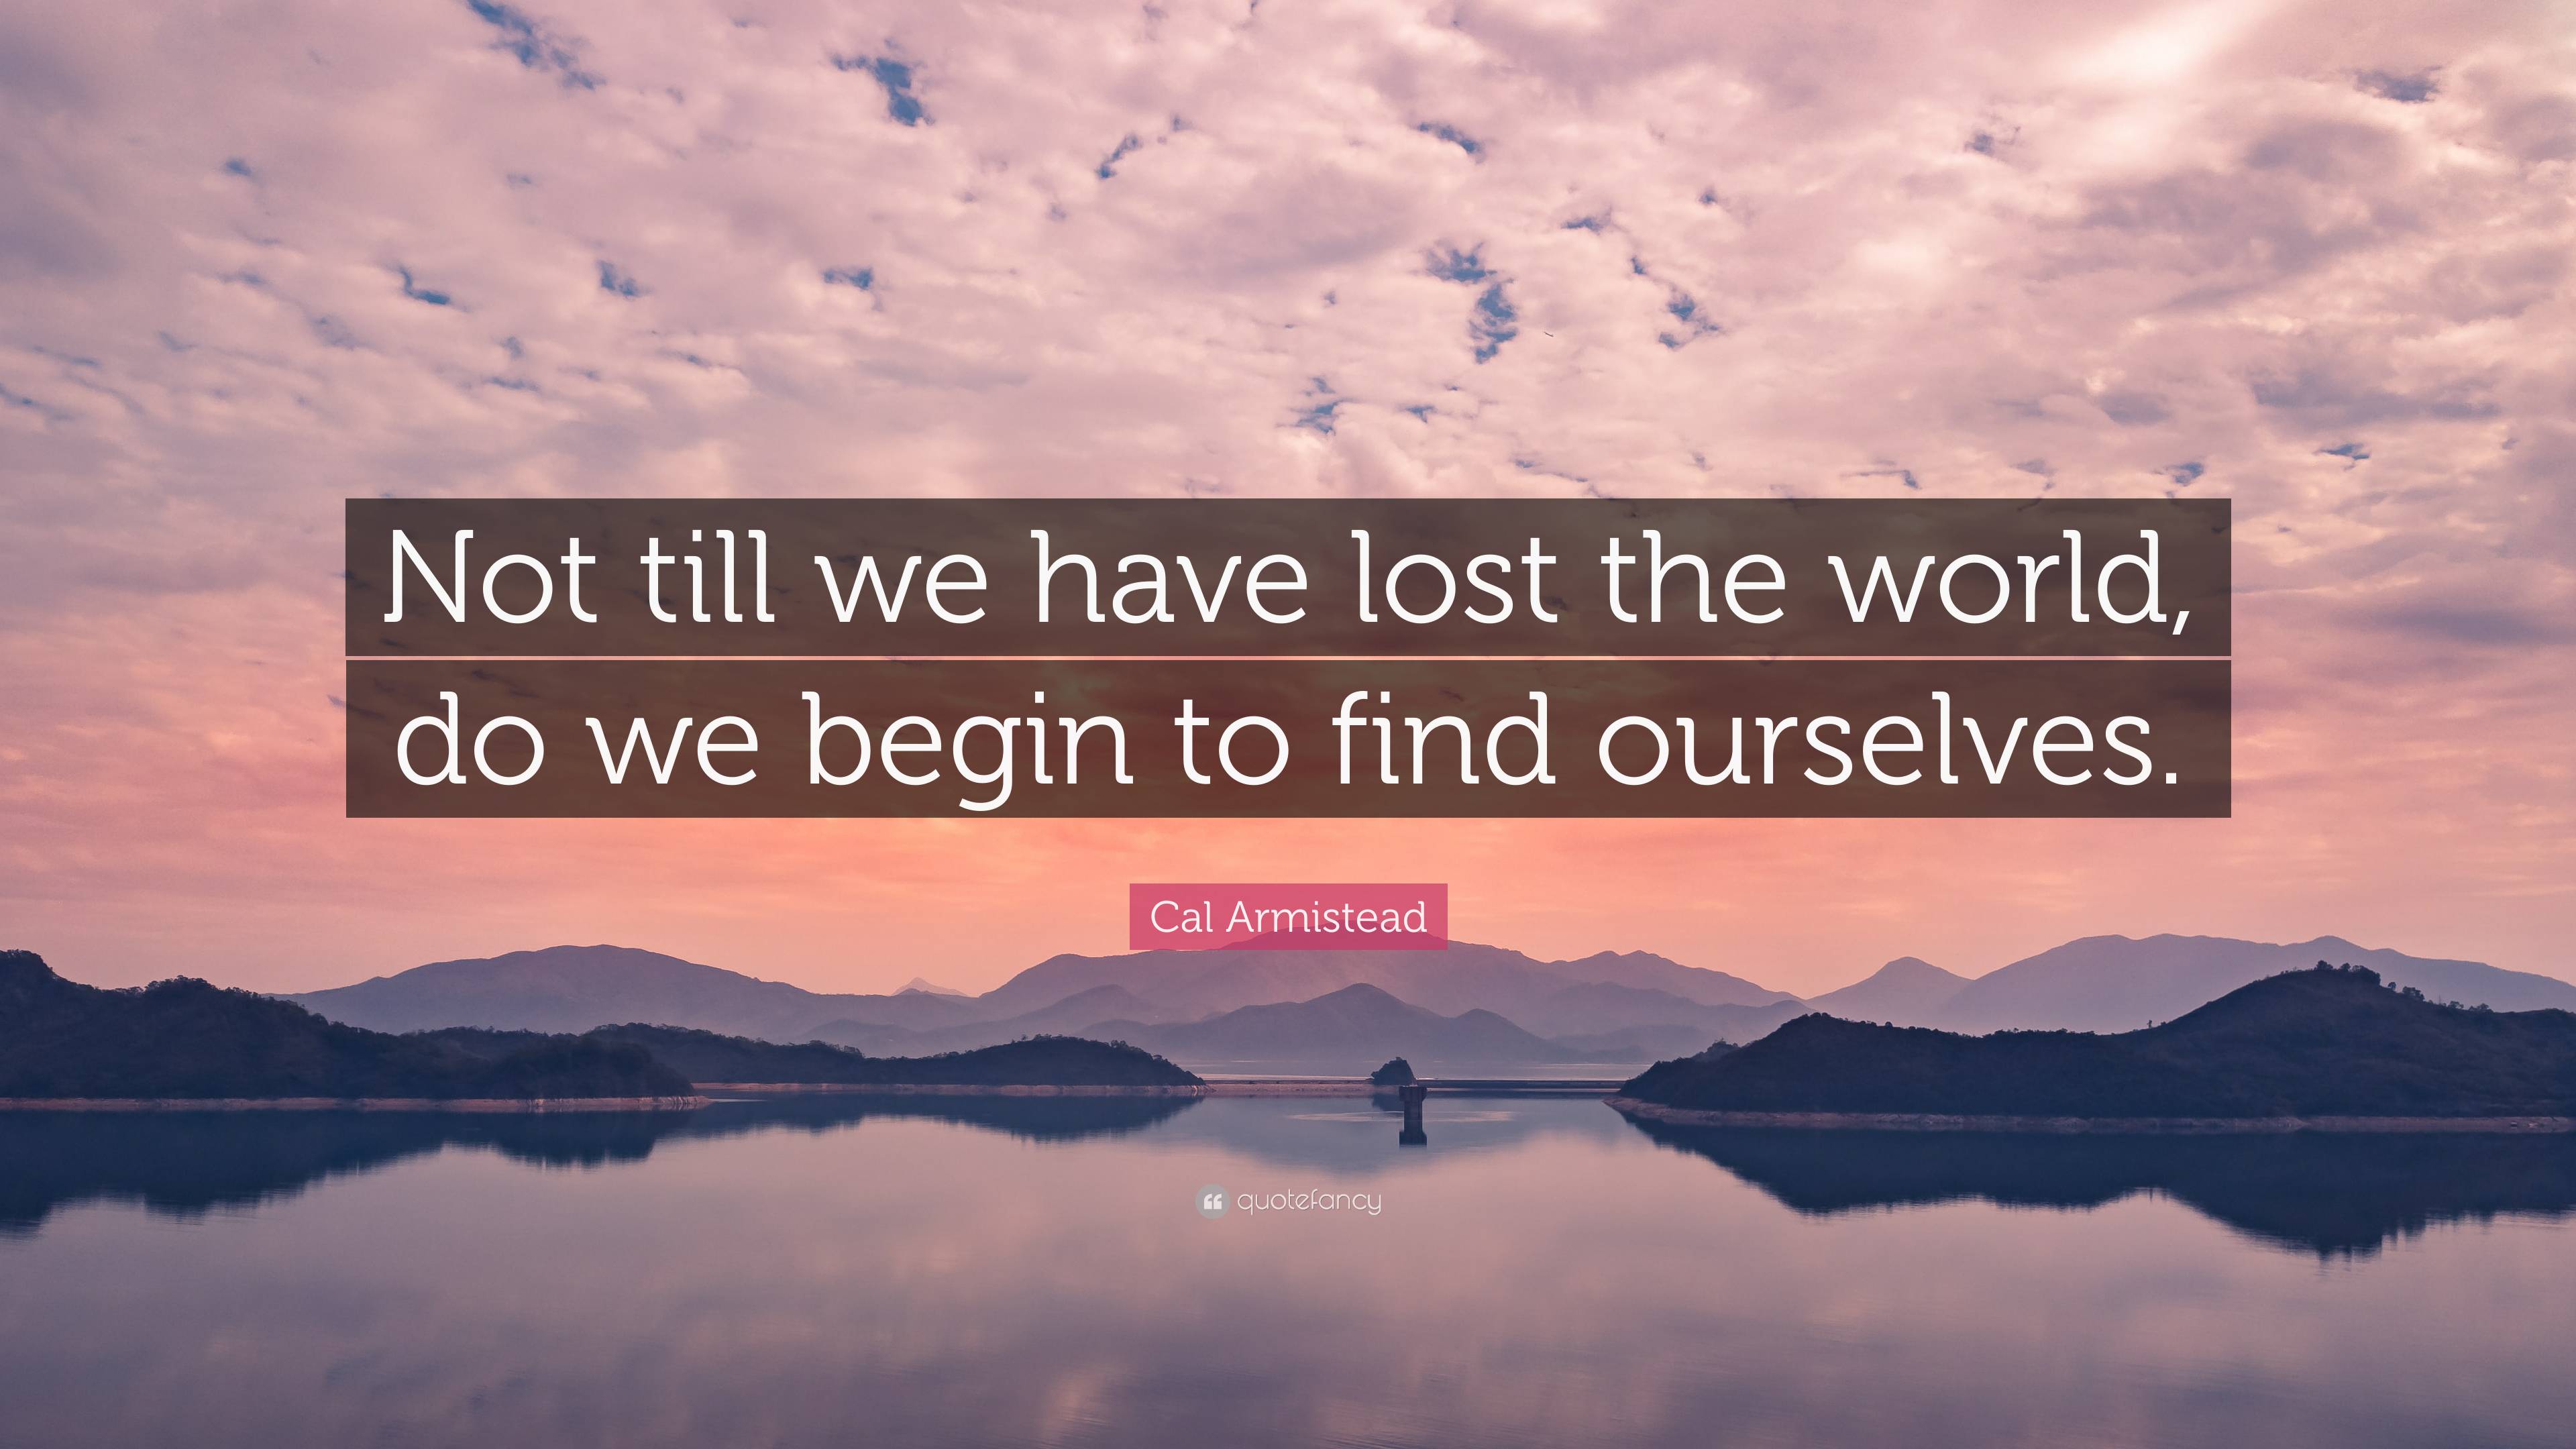 Cal Armistead Quote: “Not till we have lost the world, do we begin to ...